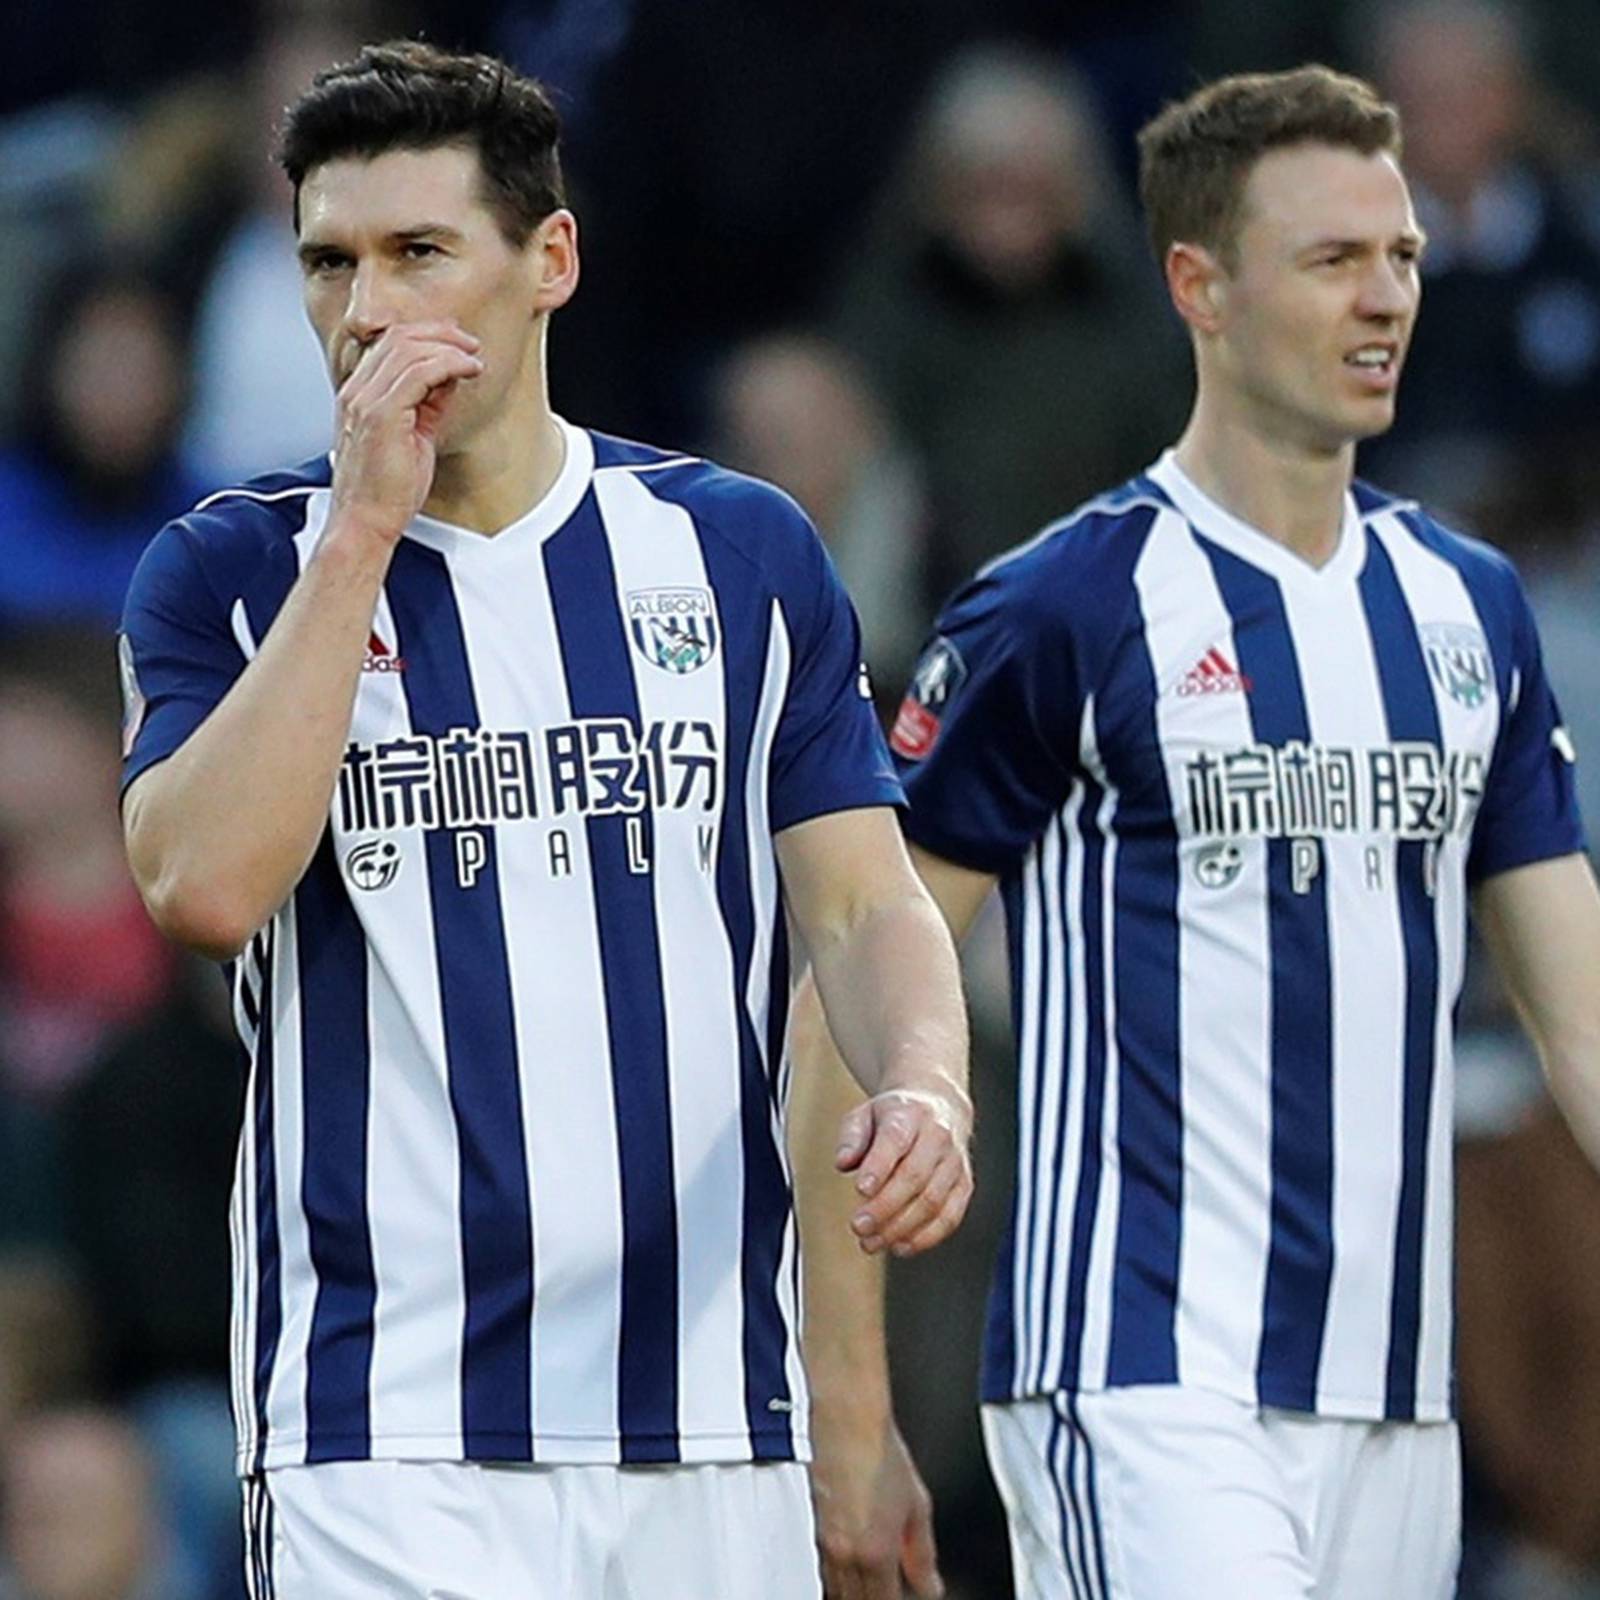 West Brom 'taxi' quartet unlikely to face court case in Barcelona